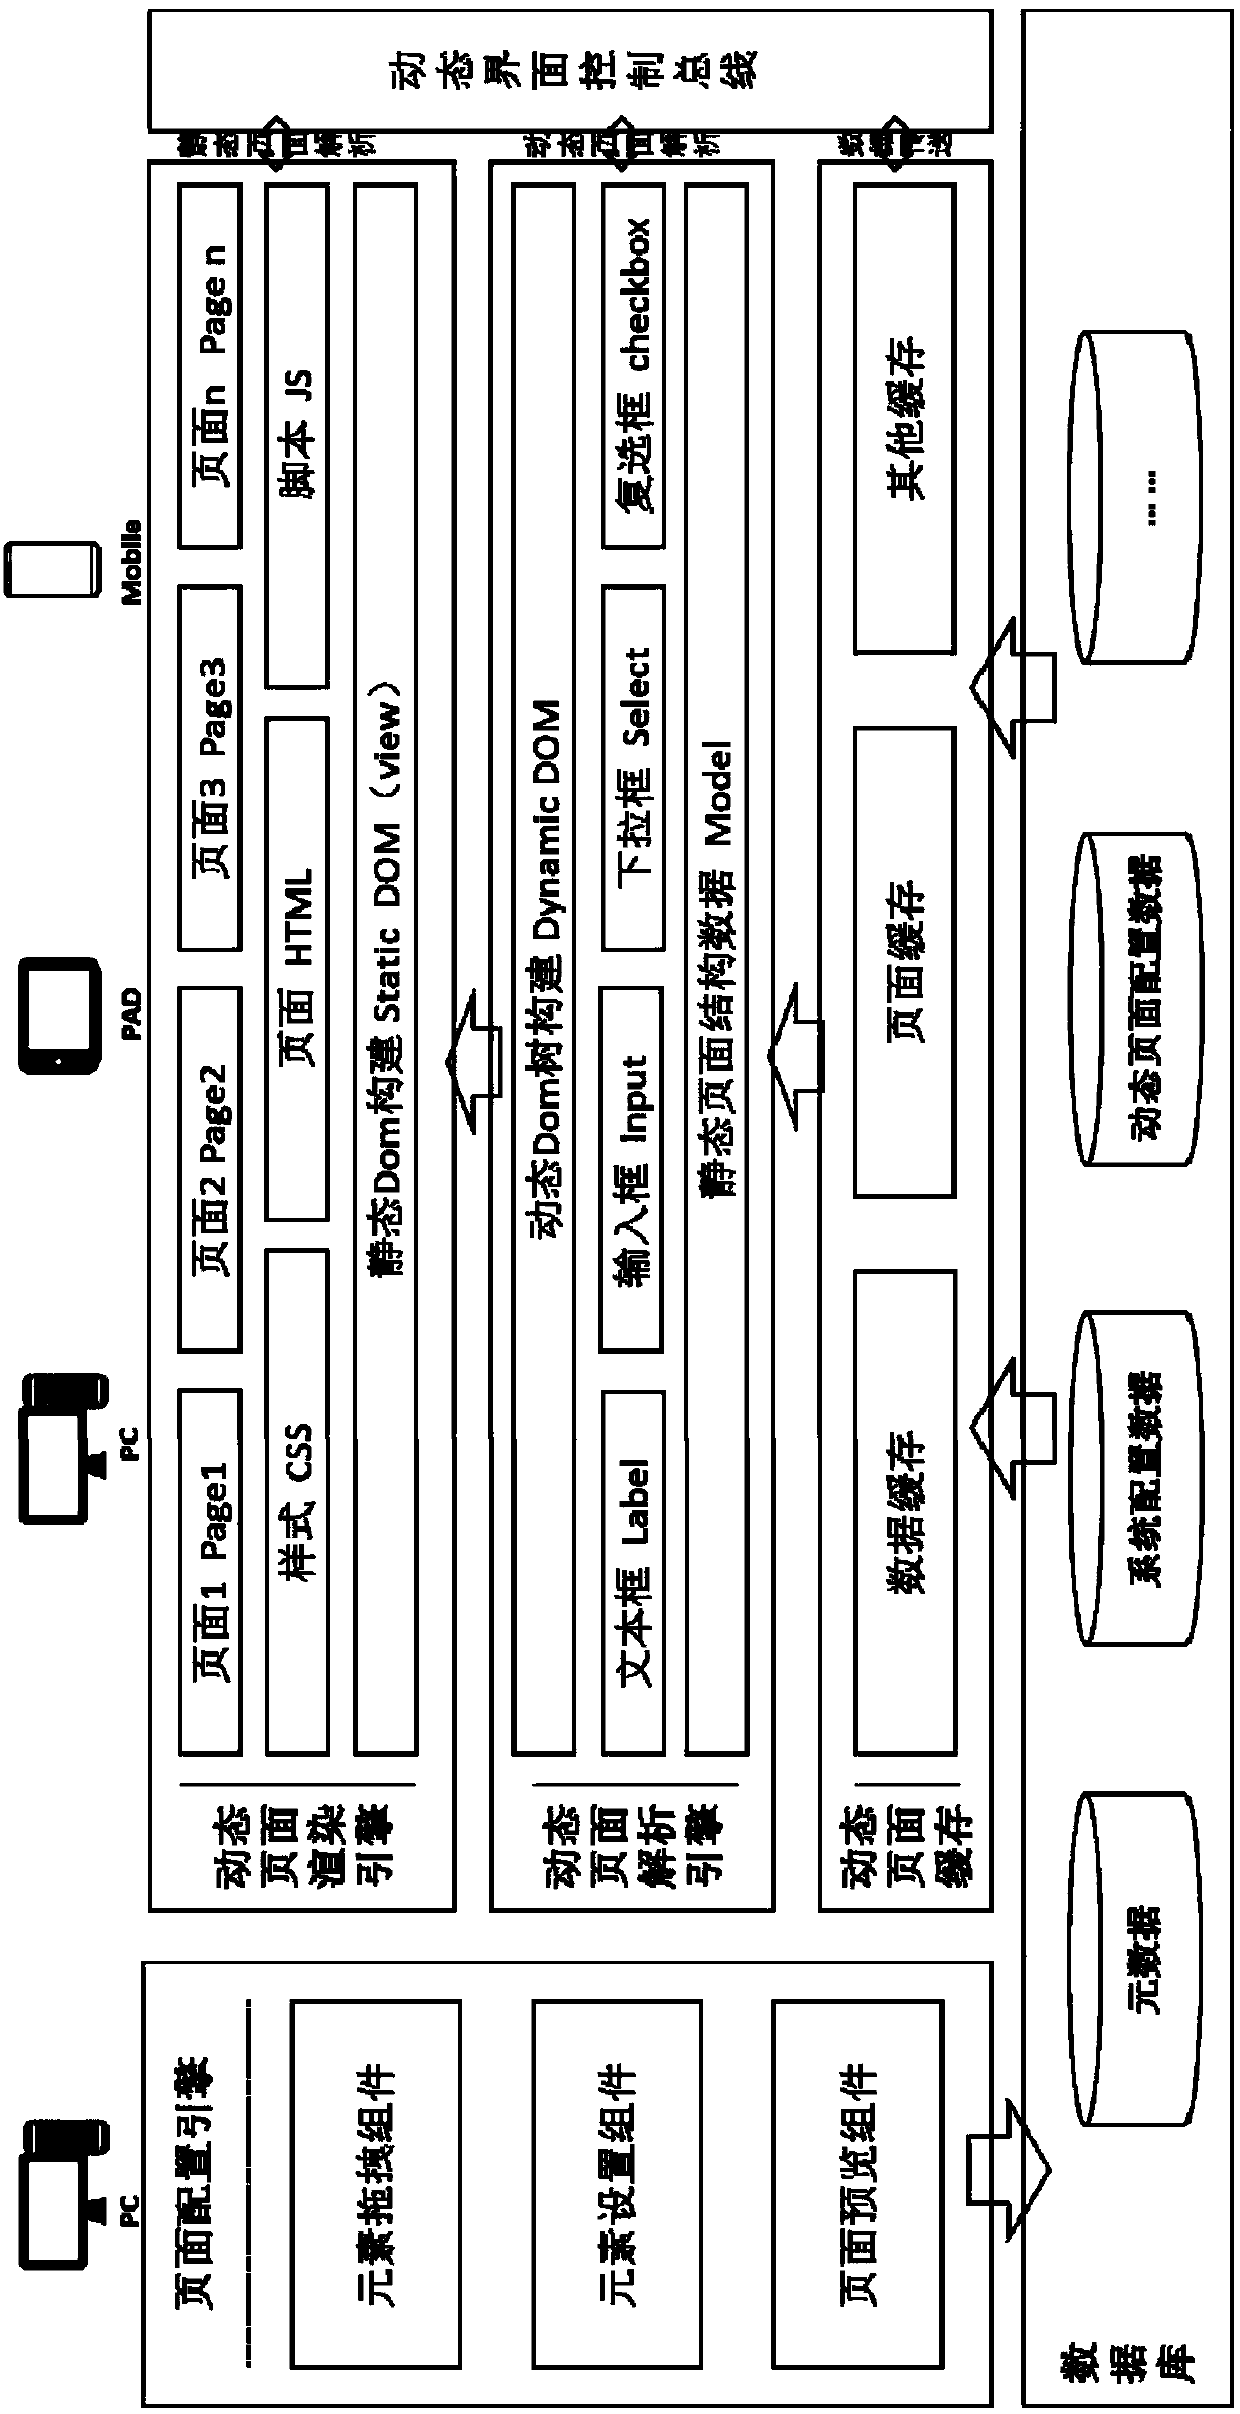 H5-based visual service interface dynamic configuration method